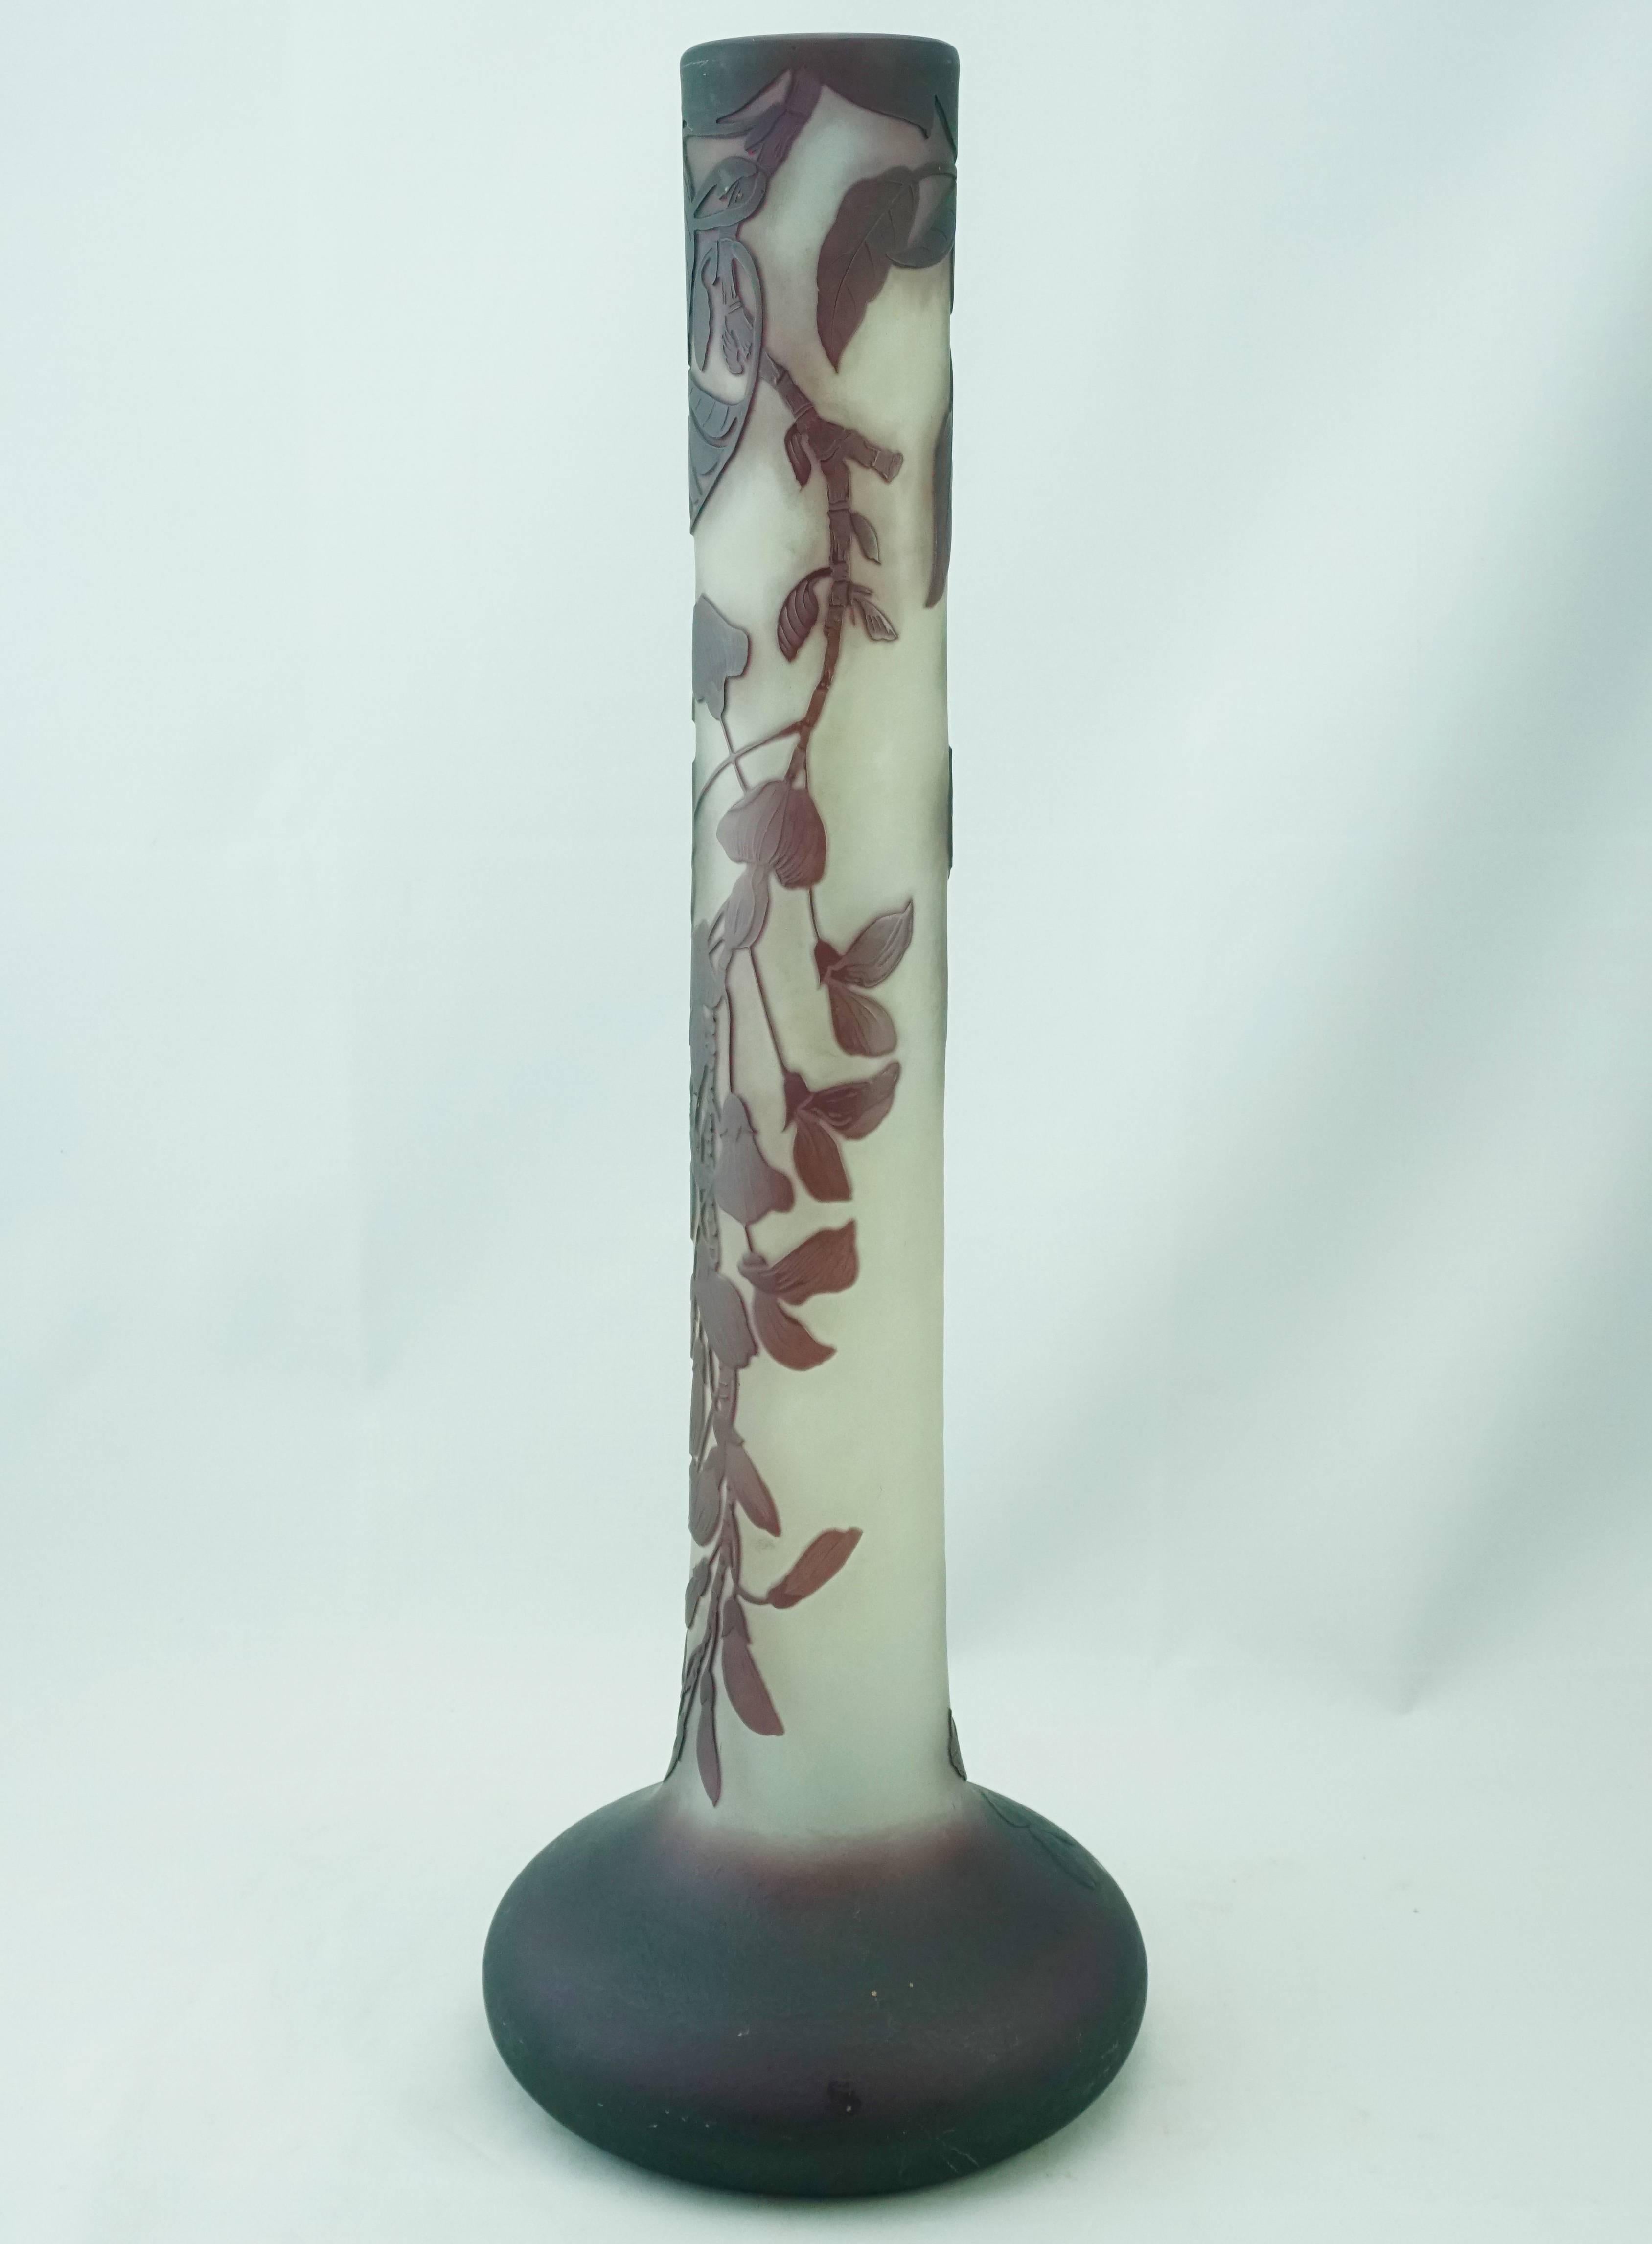 A large Galle purple over cream overlay acid etched and wheel carved eaves and hanging flowers glass stick vase. Nancy, France, circa 1900

Marks: gallé

Measure: Height 17.4 inches (44.1 cm)
Diameter: 6 inches.

Condition: Excellent.

AVANTIQUES is